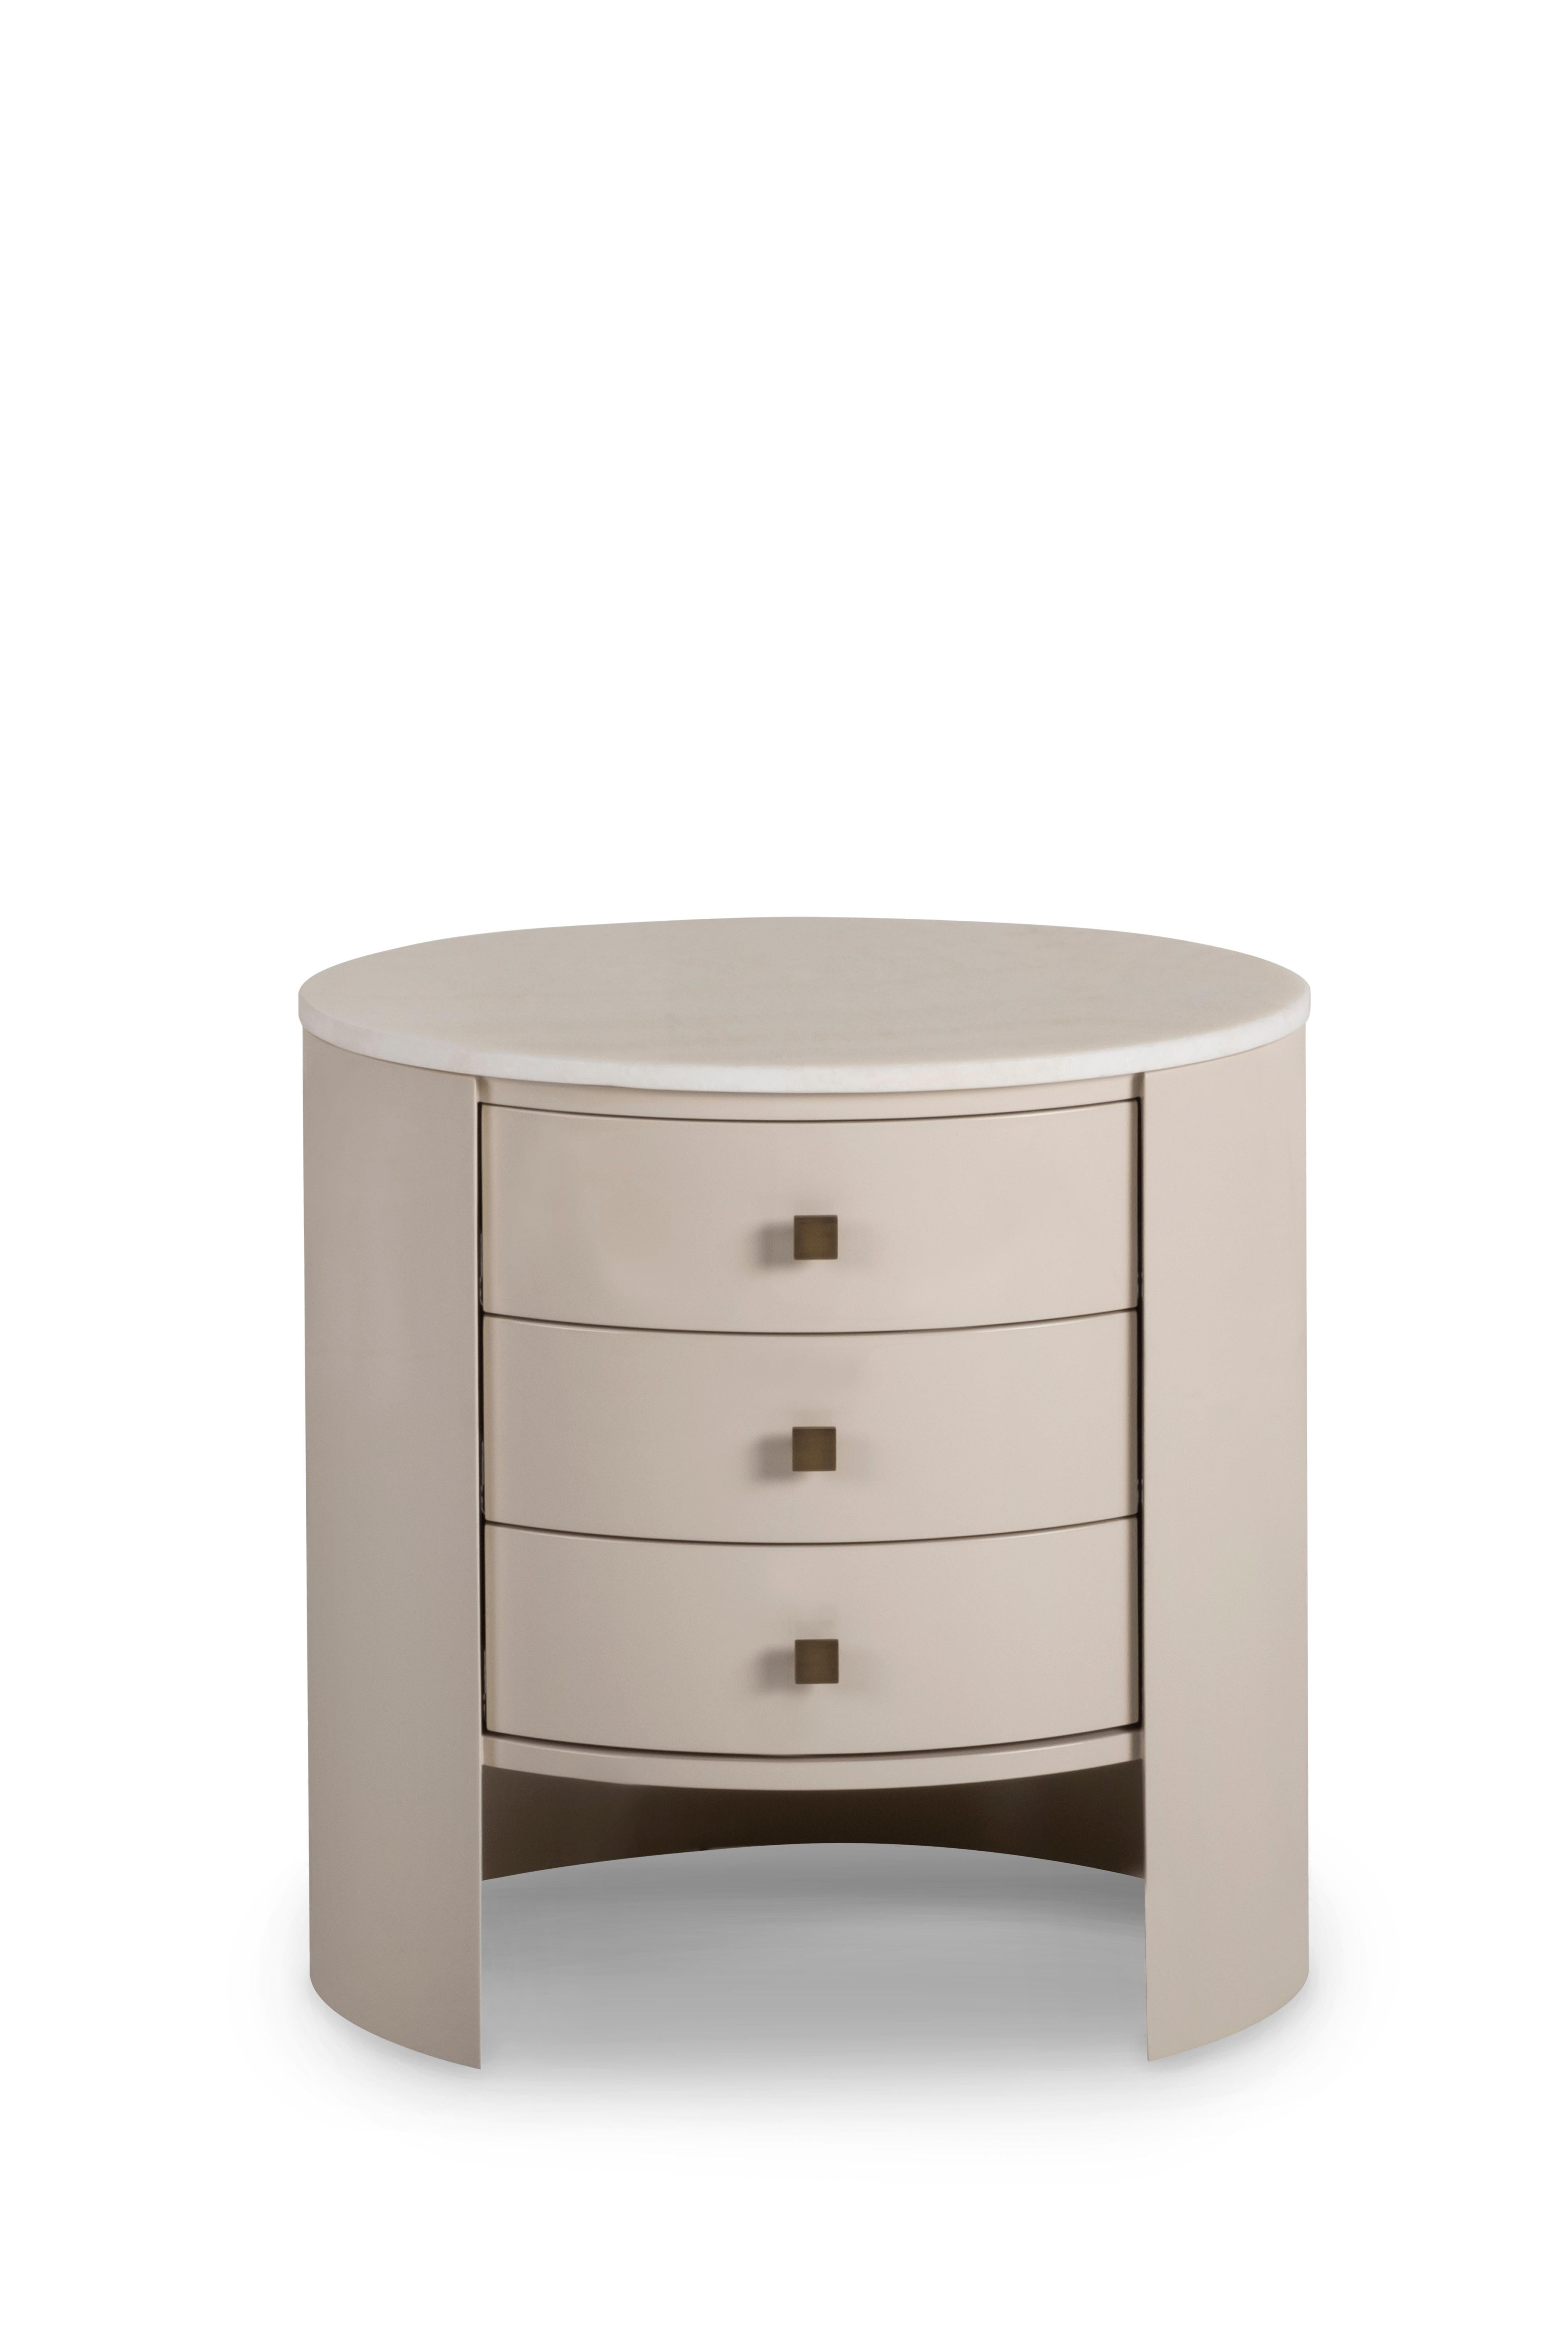 Bend Nightstand, Modern Collection, Handcrafted in Portugal - Europe by GF Modern.

Made of beige lacquered wood and with a top in vanilla onyx, the Bend nightstand is designed to enhance your space. With its three drawers with oxidised brass